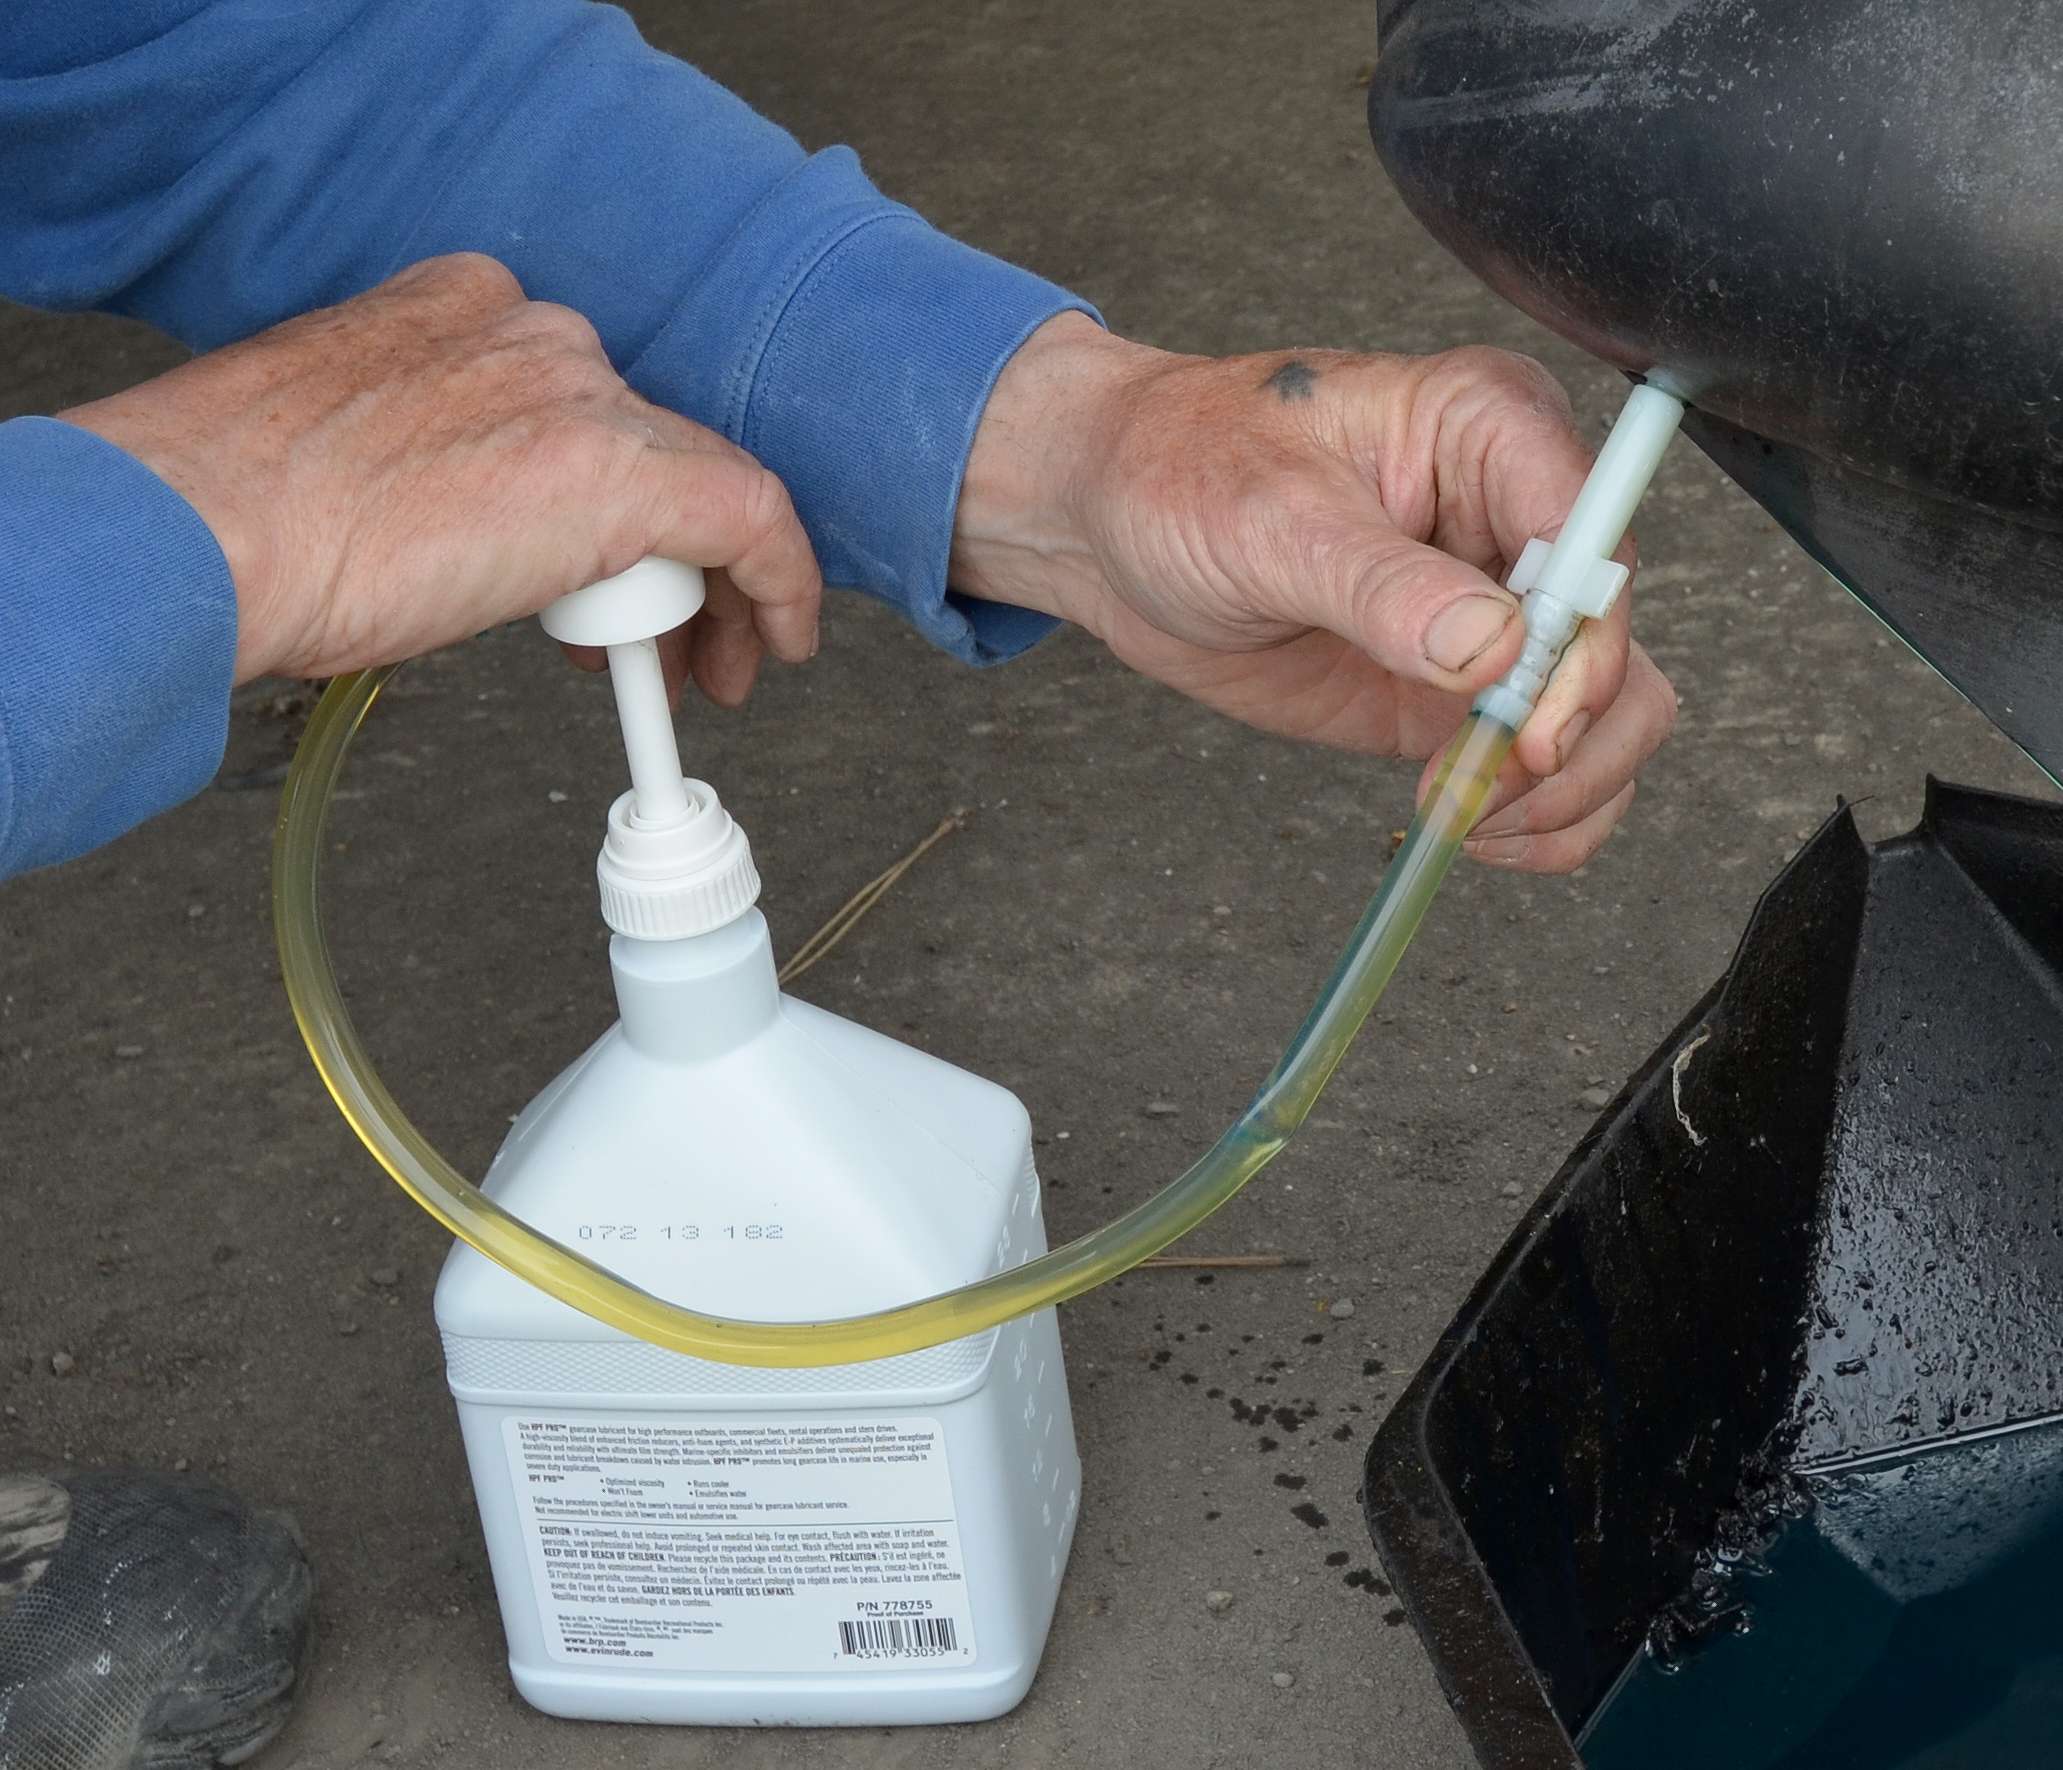 <em>CHANGING GEAR OIL</em>
<br>Buy outboard gear lube that comes with a pump. Insert the line from the container into the bottom hole. Pump the lubricant slowly into the lower unit to avoid creating air pockets.